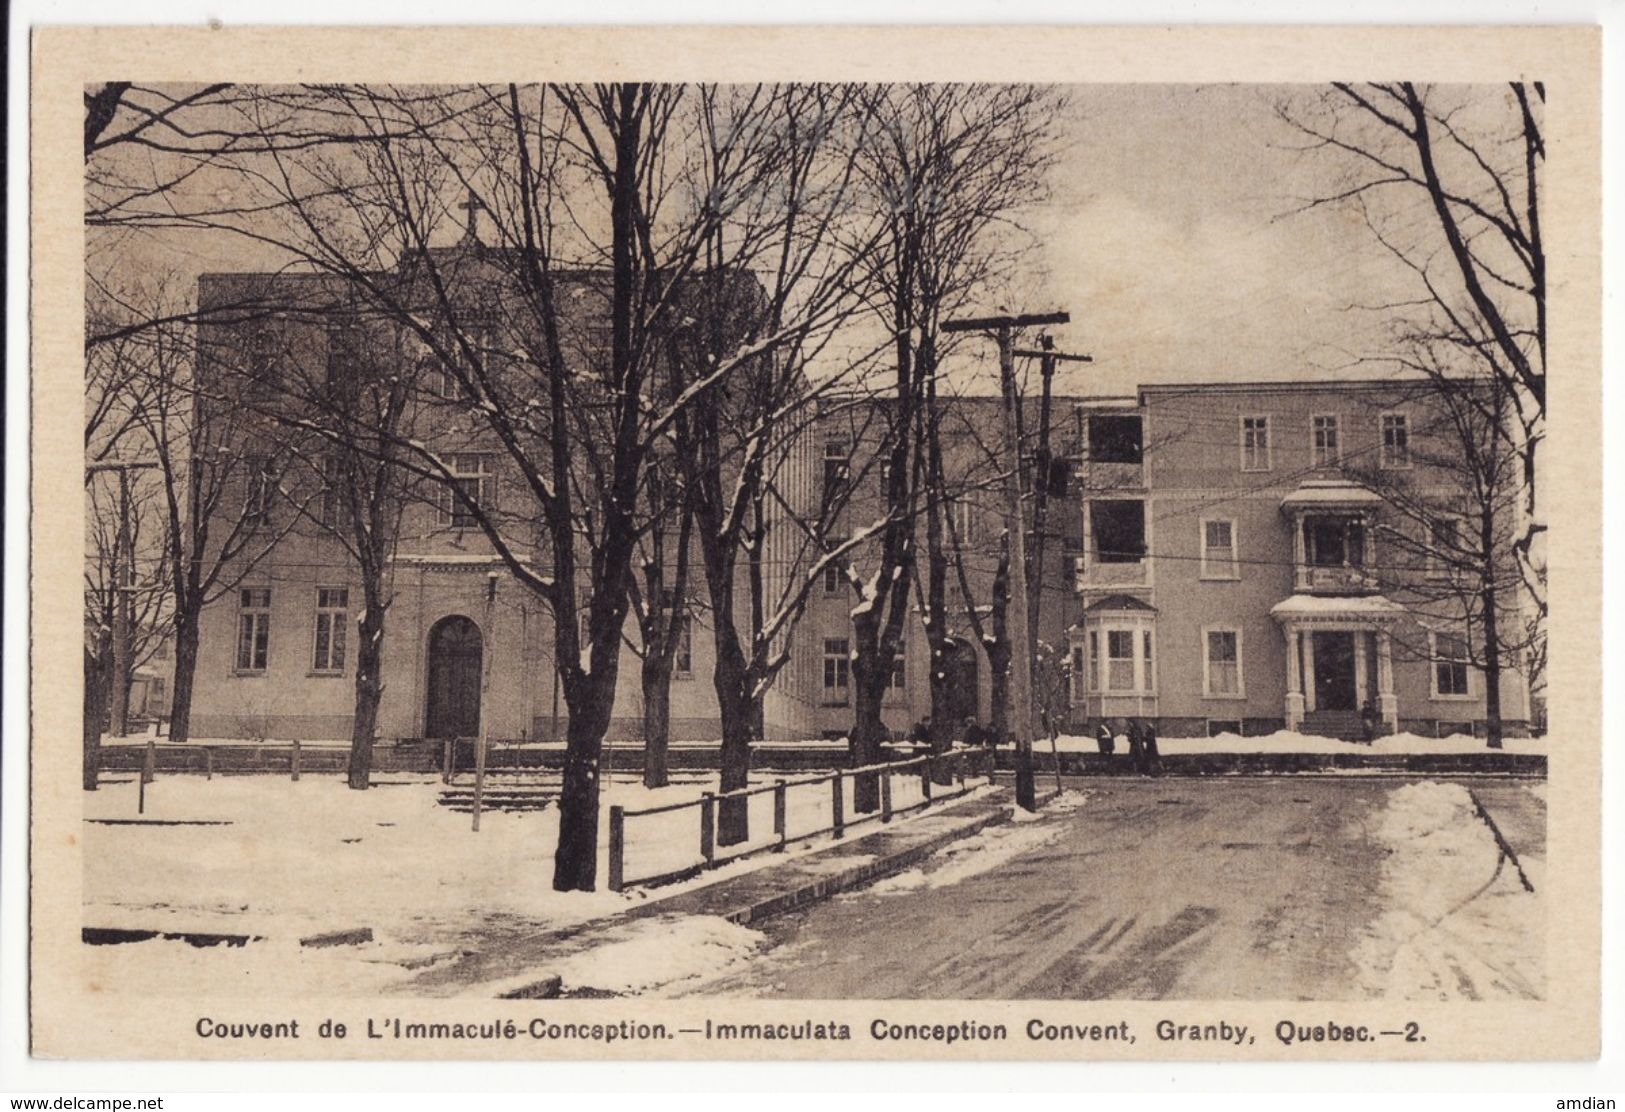 GRANBY Quebec PQ, Immaculate Conception Convent C1940s QC Canada Vintage Postcard M8934 - Granby